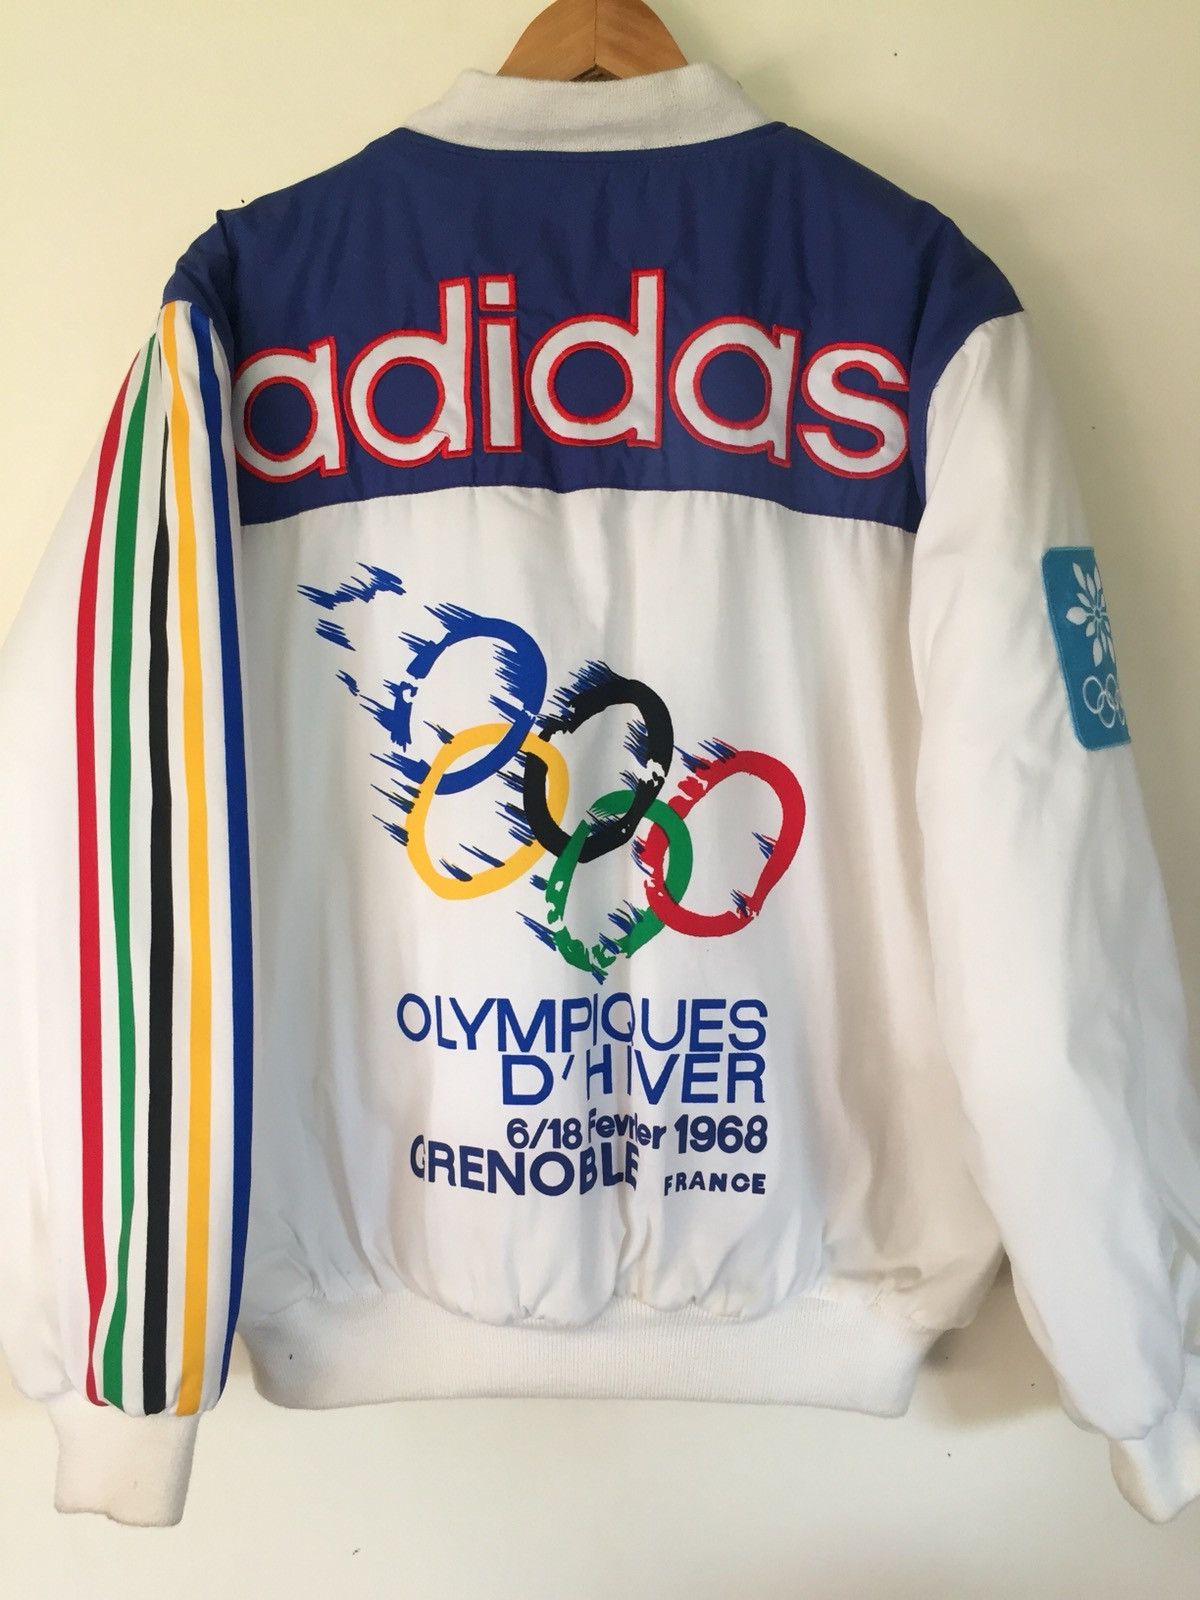 Adidas Vintage Adidas 1972 Olympic Jacket Size US M / EU 48-50 / 2 - 1 Preview